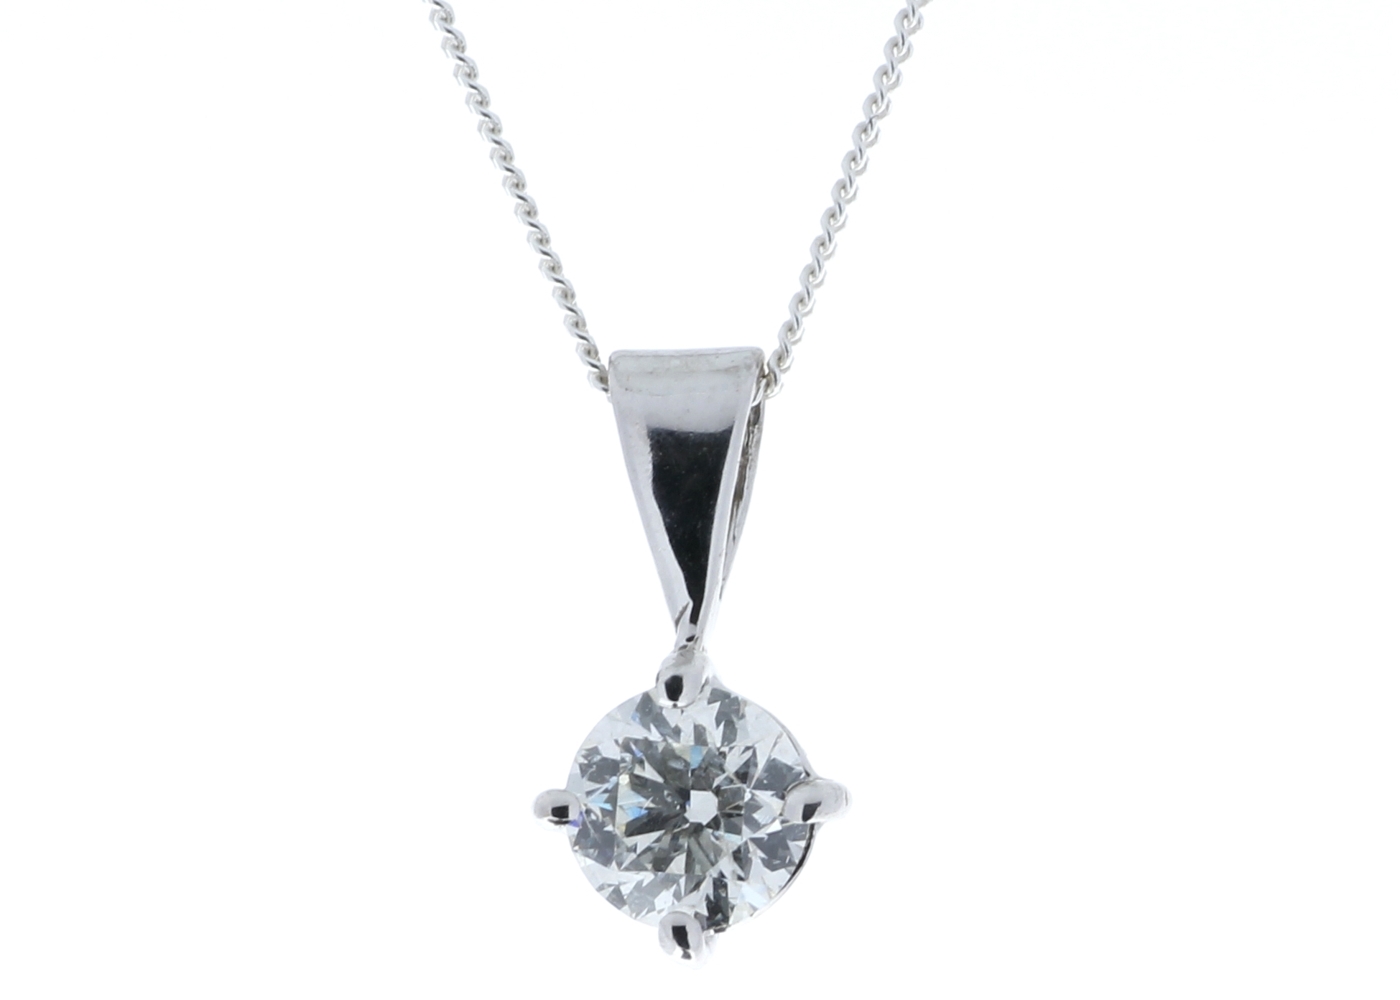 18ct White Gold Diamond Pendant 0.70 Carats - Valued By GIE £11,890.00 - One round brilliant cut